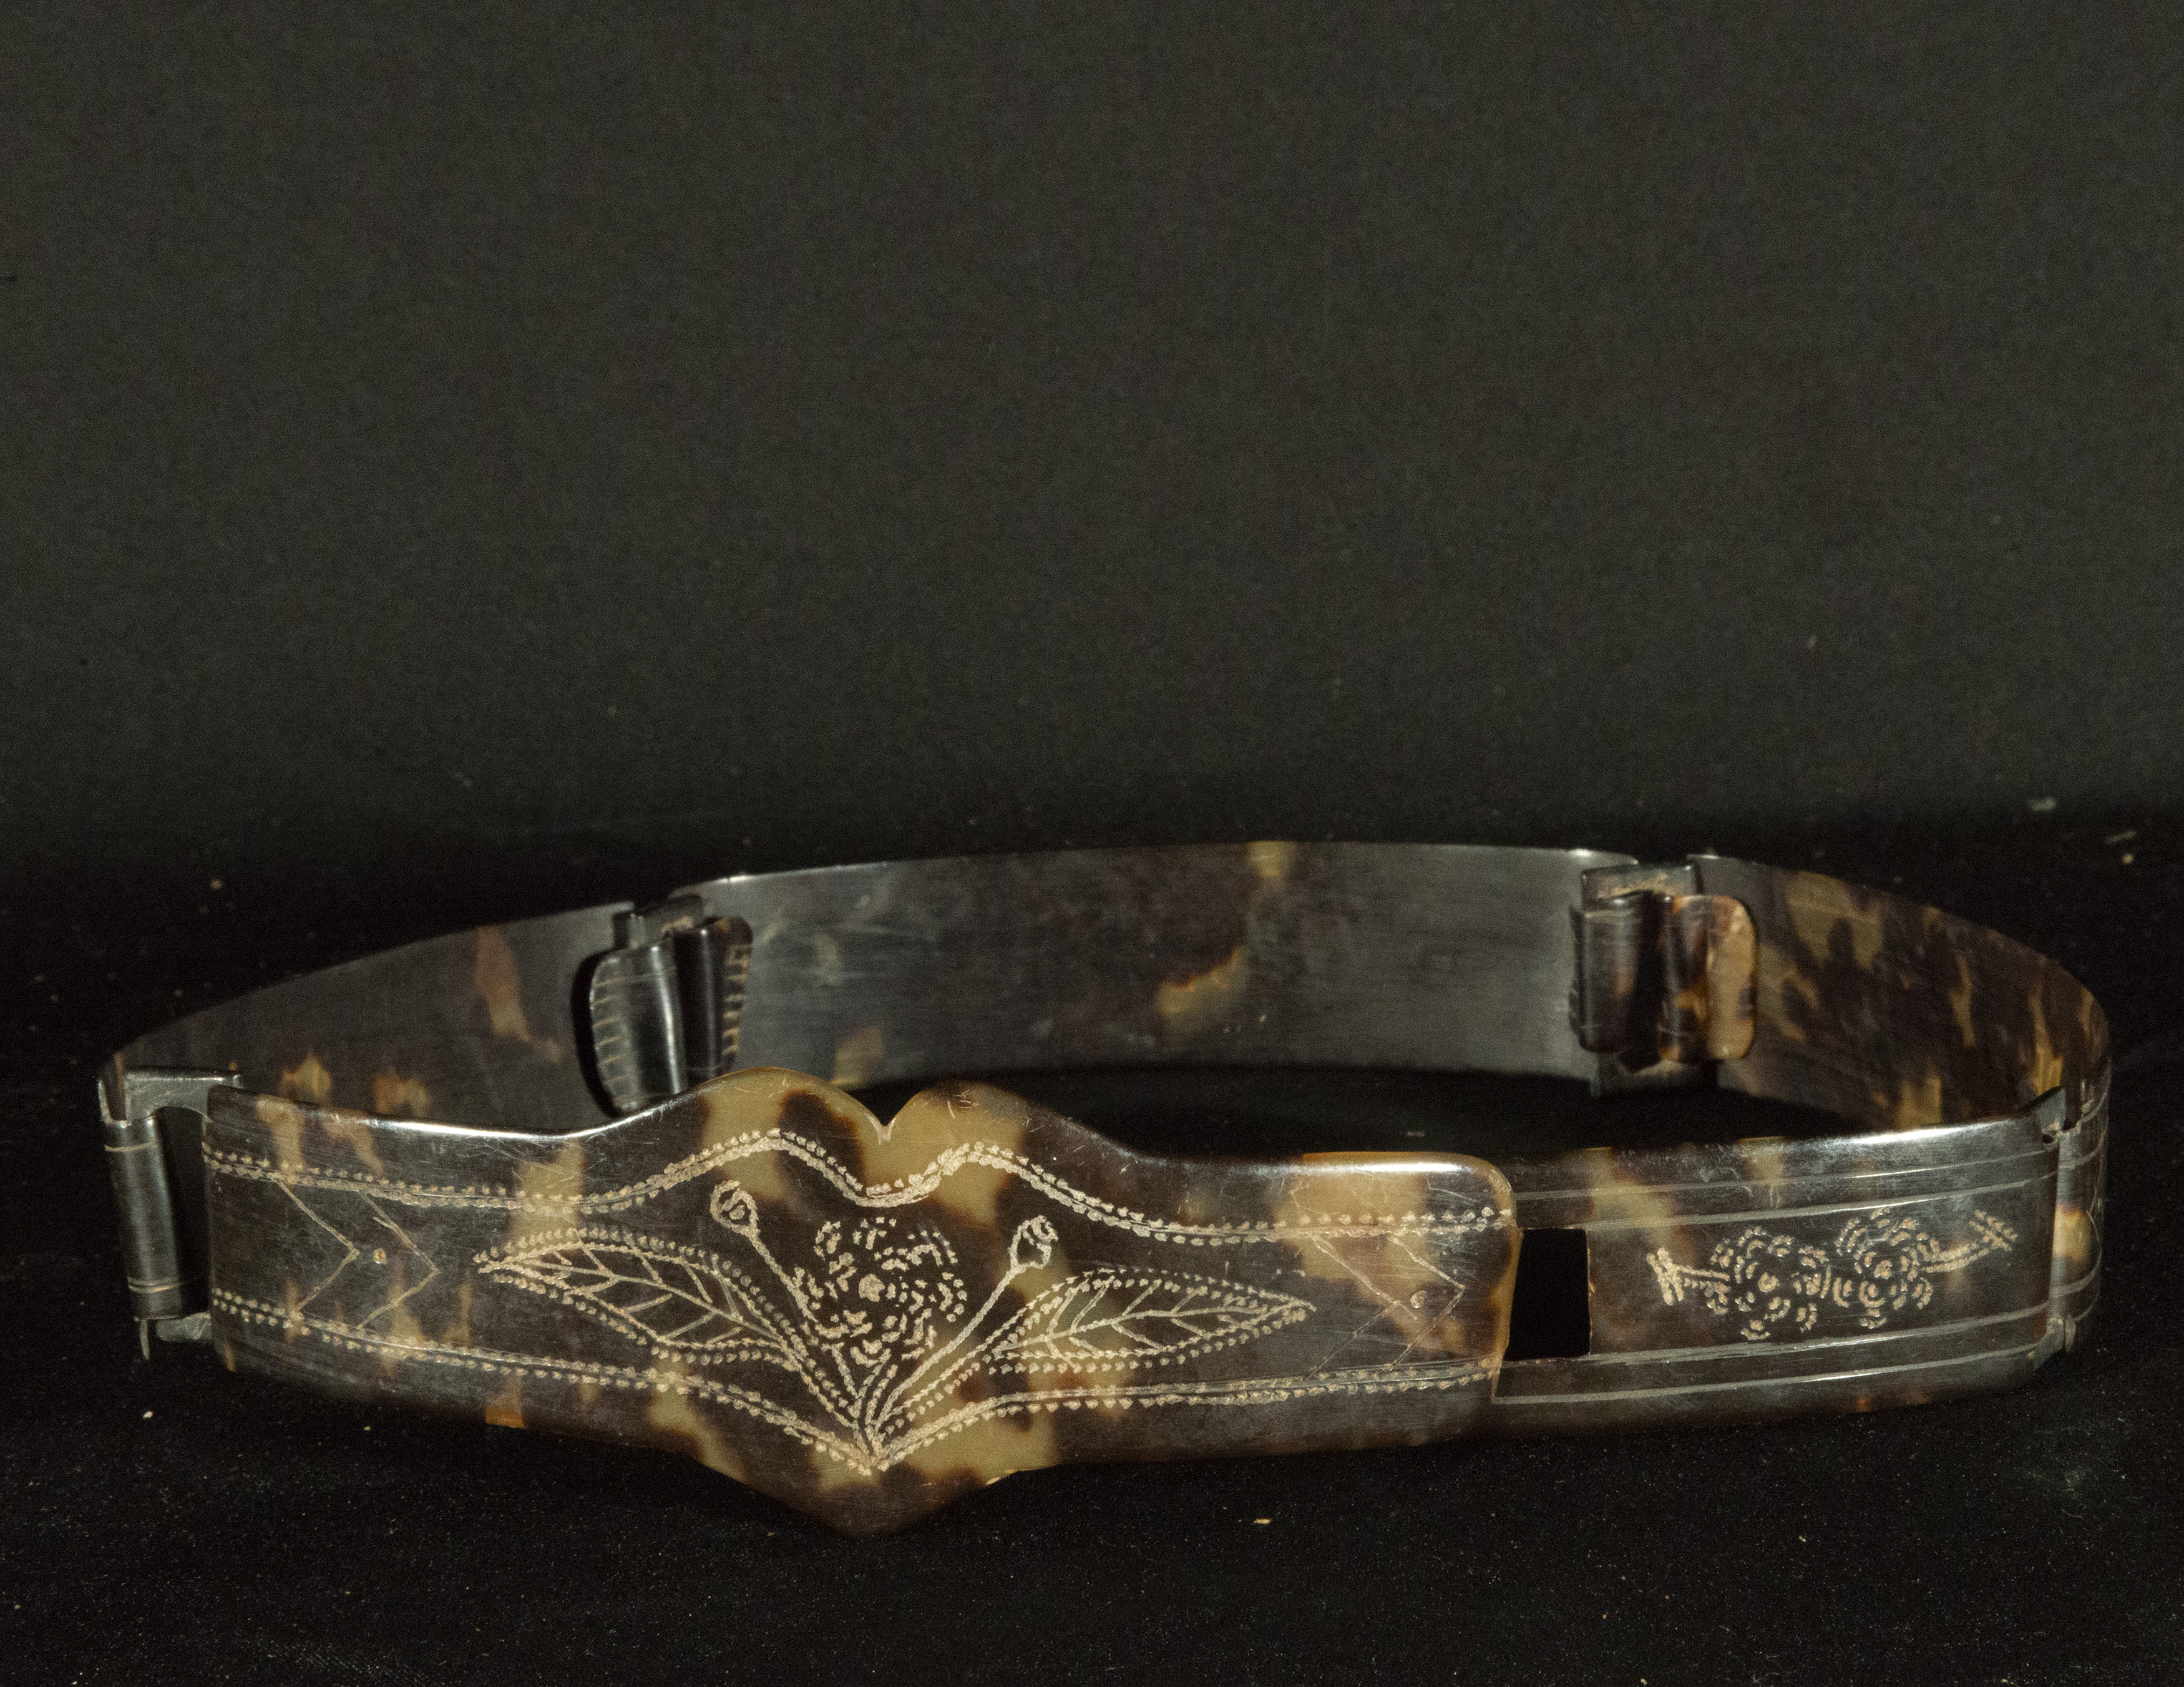 Rare French colonial belt in tortoiseshell, with Lady's name and engraved flourishes